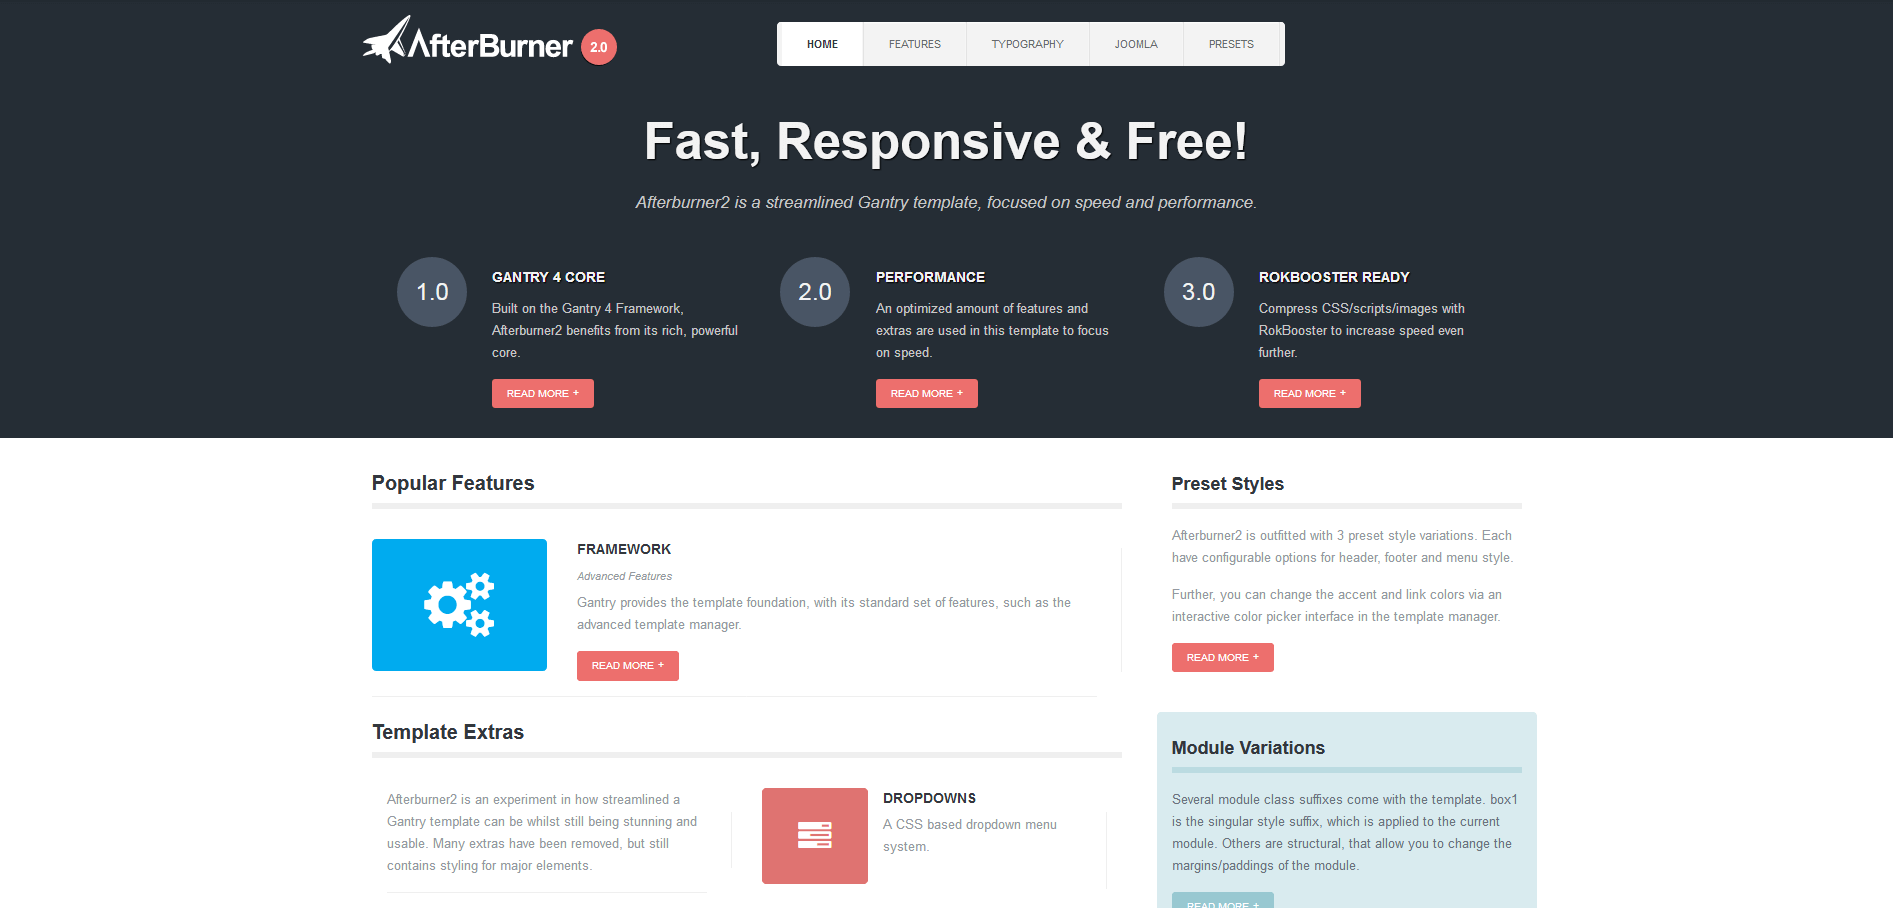 Last of the features Joomla templates – Afterburner 2